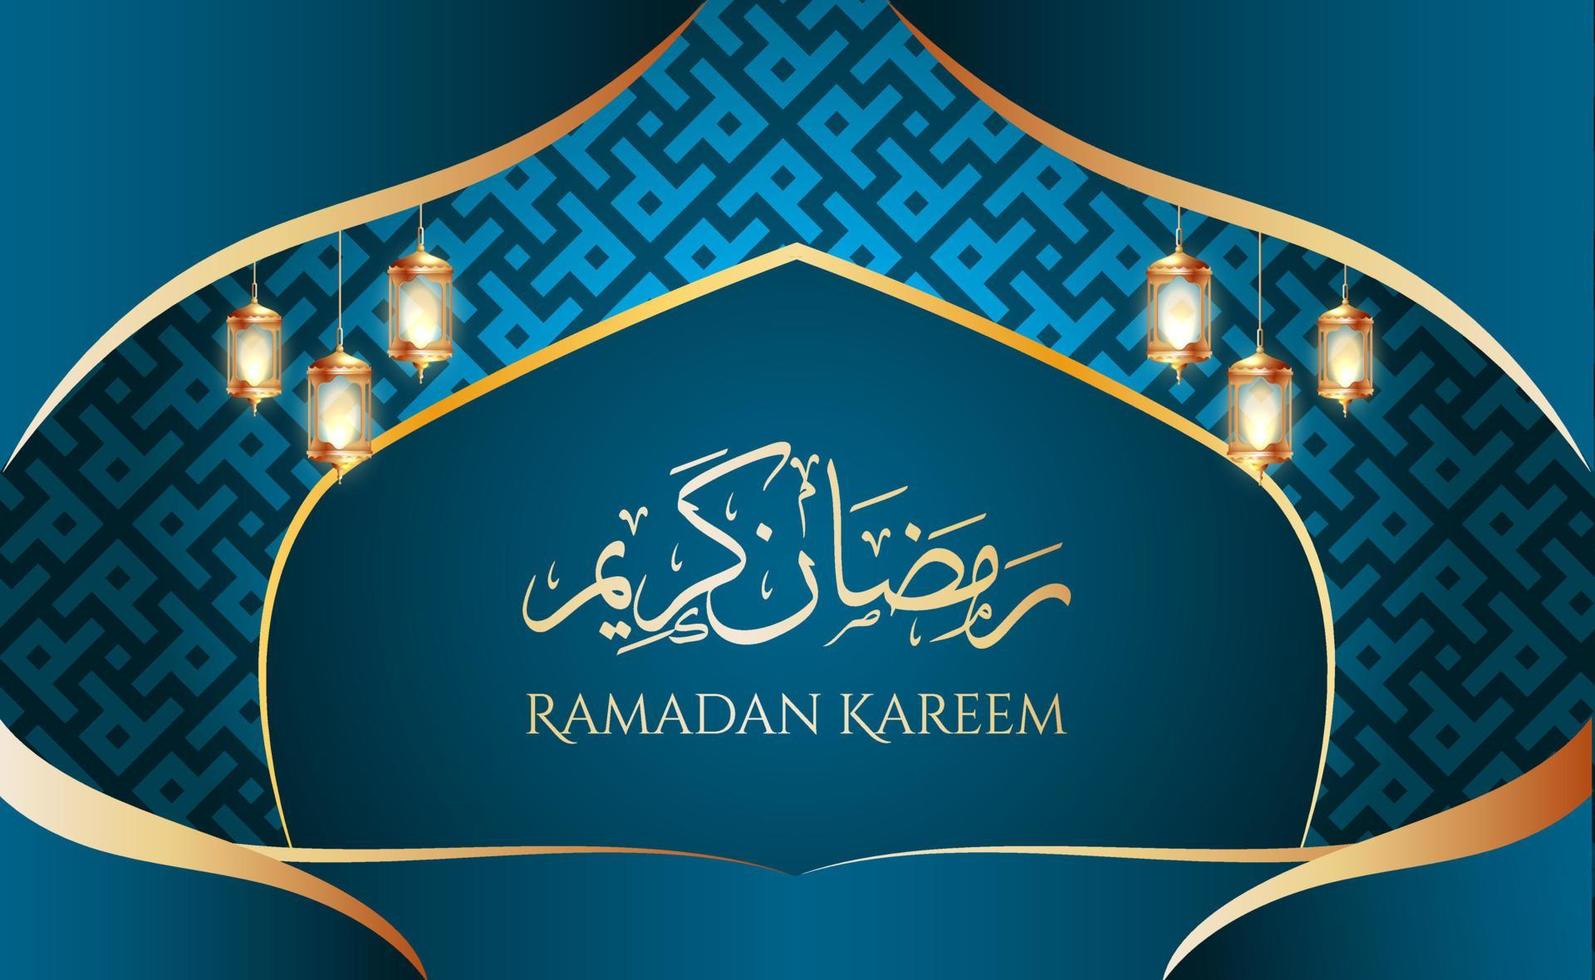 Ramadan Kareem Beautiful Greeting Card With Arabic Calligraphy Which Means Ramadan Kareem Islamic Background With Islamic Ornament And Mosaic Pattern Suitable Also For Eid Mubarak Vector